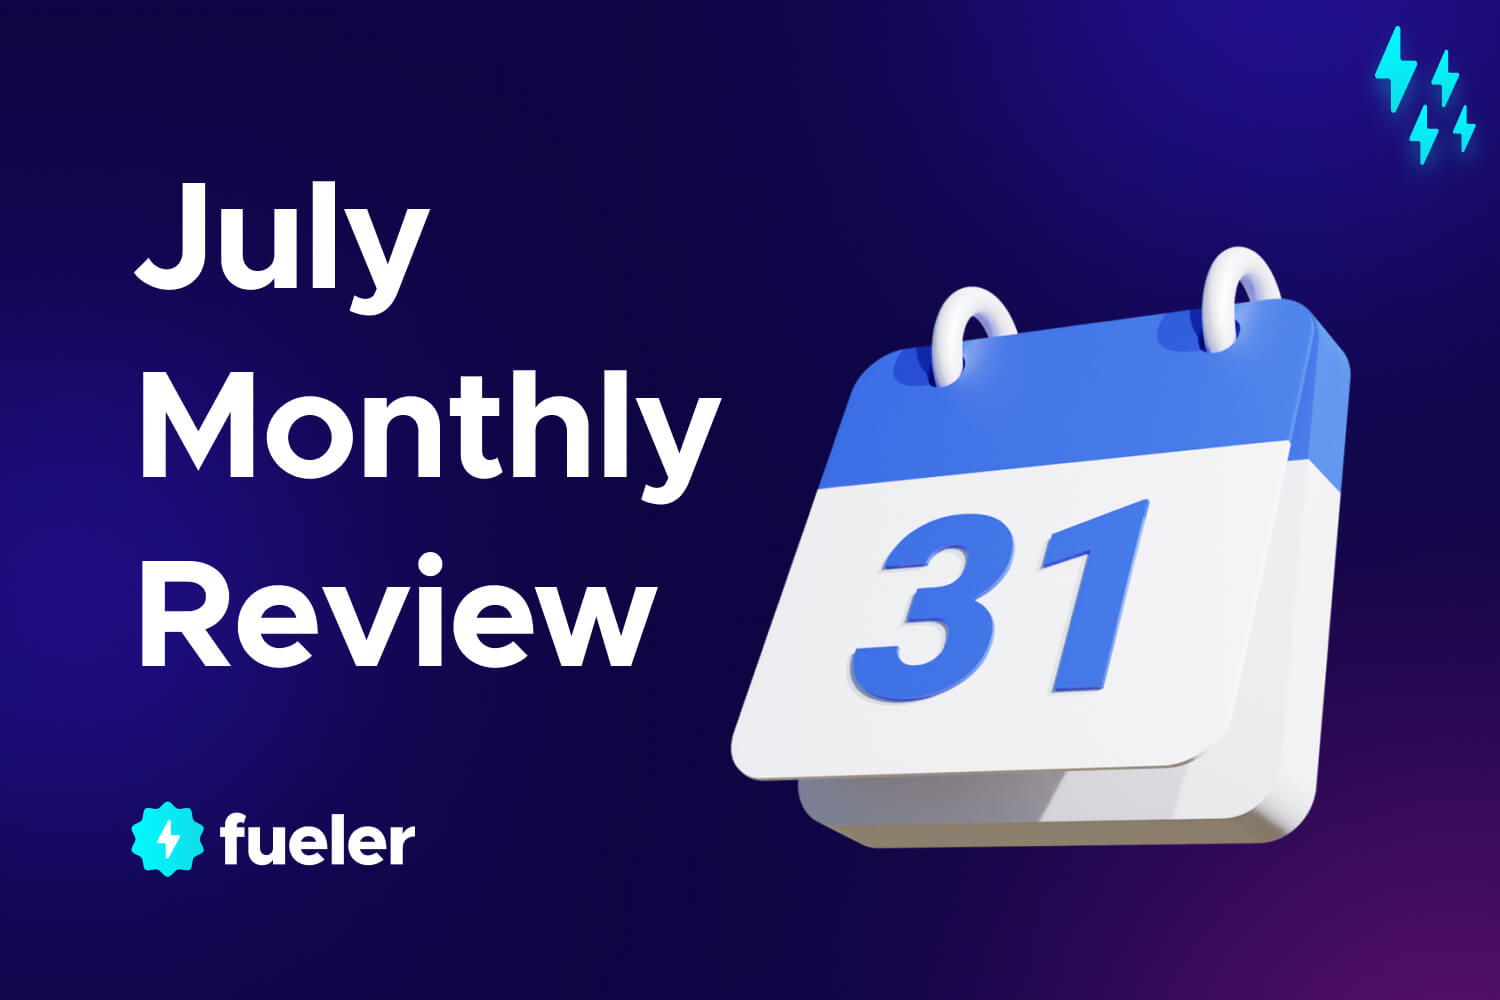 What's New in Fueler: July 2022